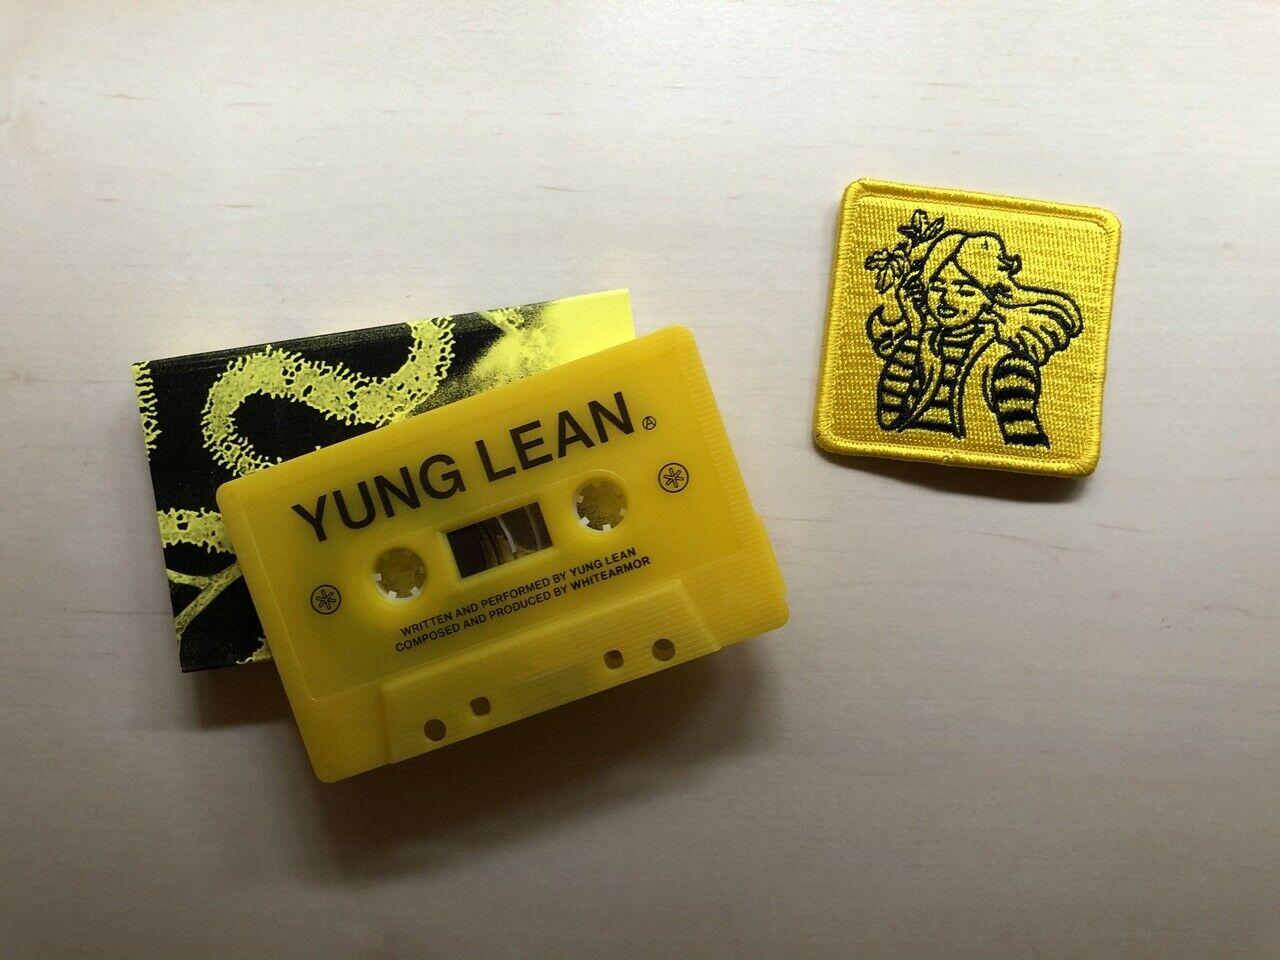 Yung lean poison ivy cassette with patch